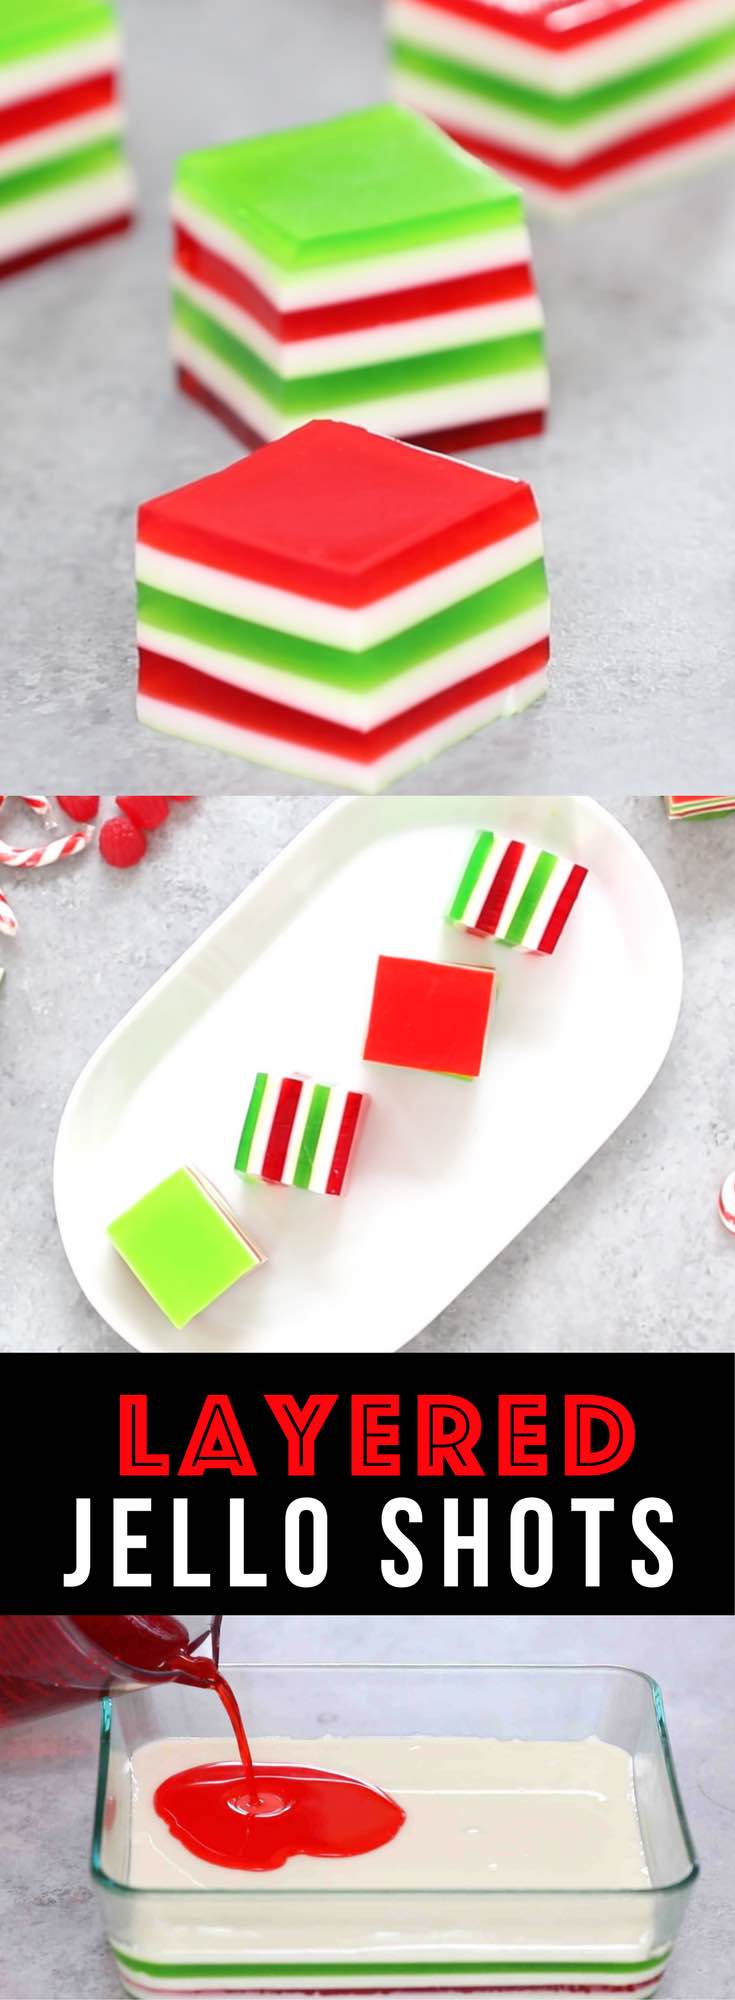 Easy Layered Jello Shots – An easy and beautiful dessert spiked with vodka for a special party! Smooth and creamy Jello shots with bright red, green and white layers. All you need is a few simple ingredients: gelatin, strawberry and lime jello powder, vodka and condensed milk. So Good! Great for holiday and birthday parties. Easy recipe, party desserts. Finger food. No Bake. Vegetarian. Video recipe. | Tipbuzz.com